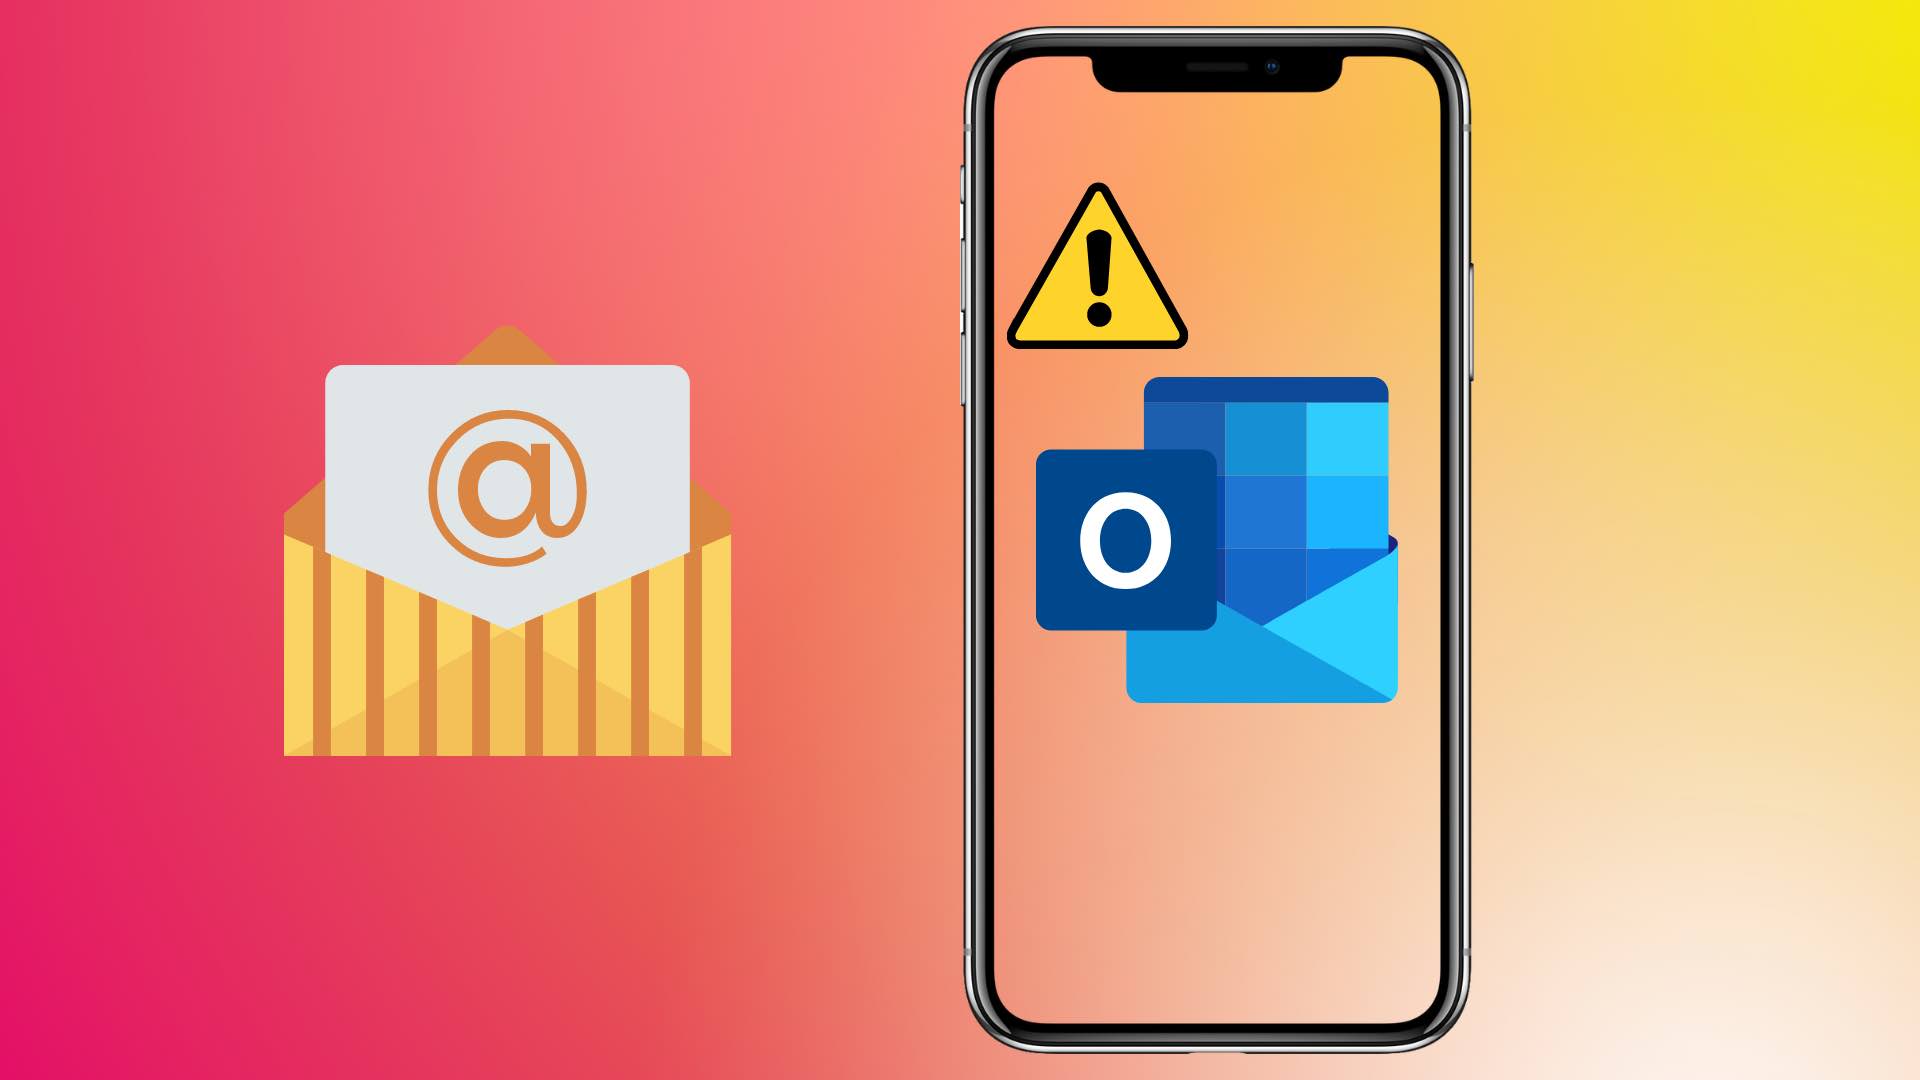 Top 8 Ways to Fix Gmail Not Working on iPhone